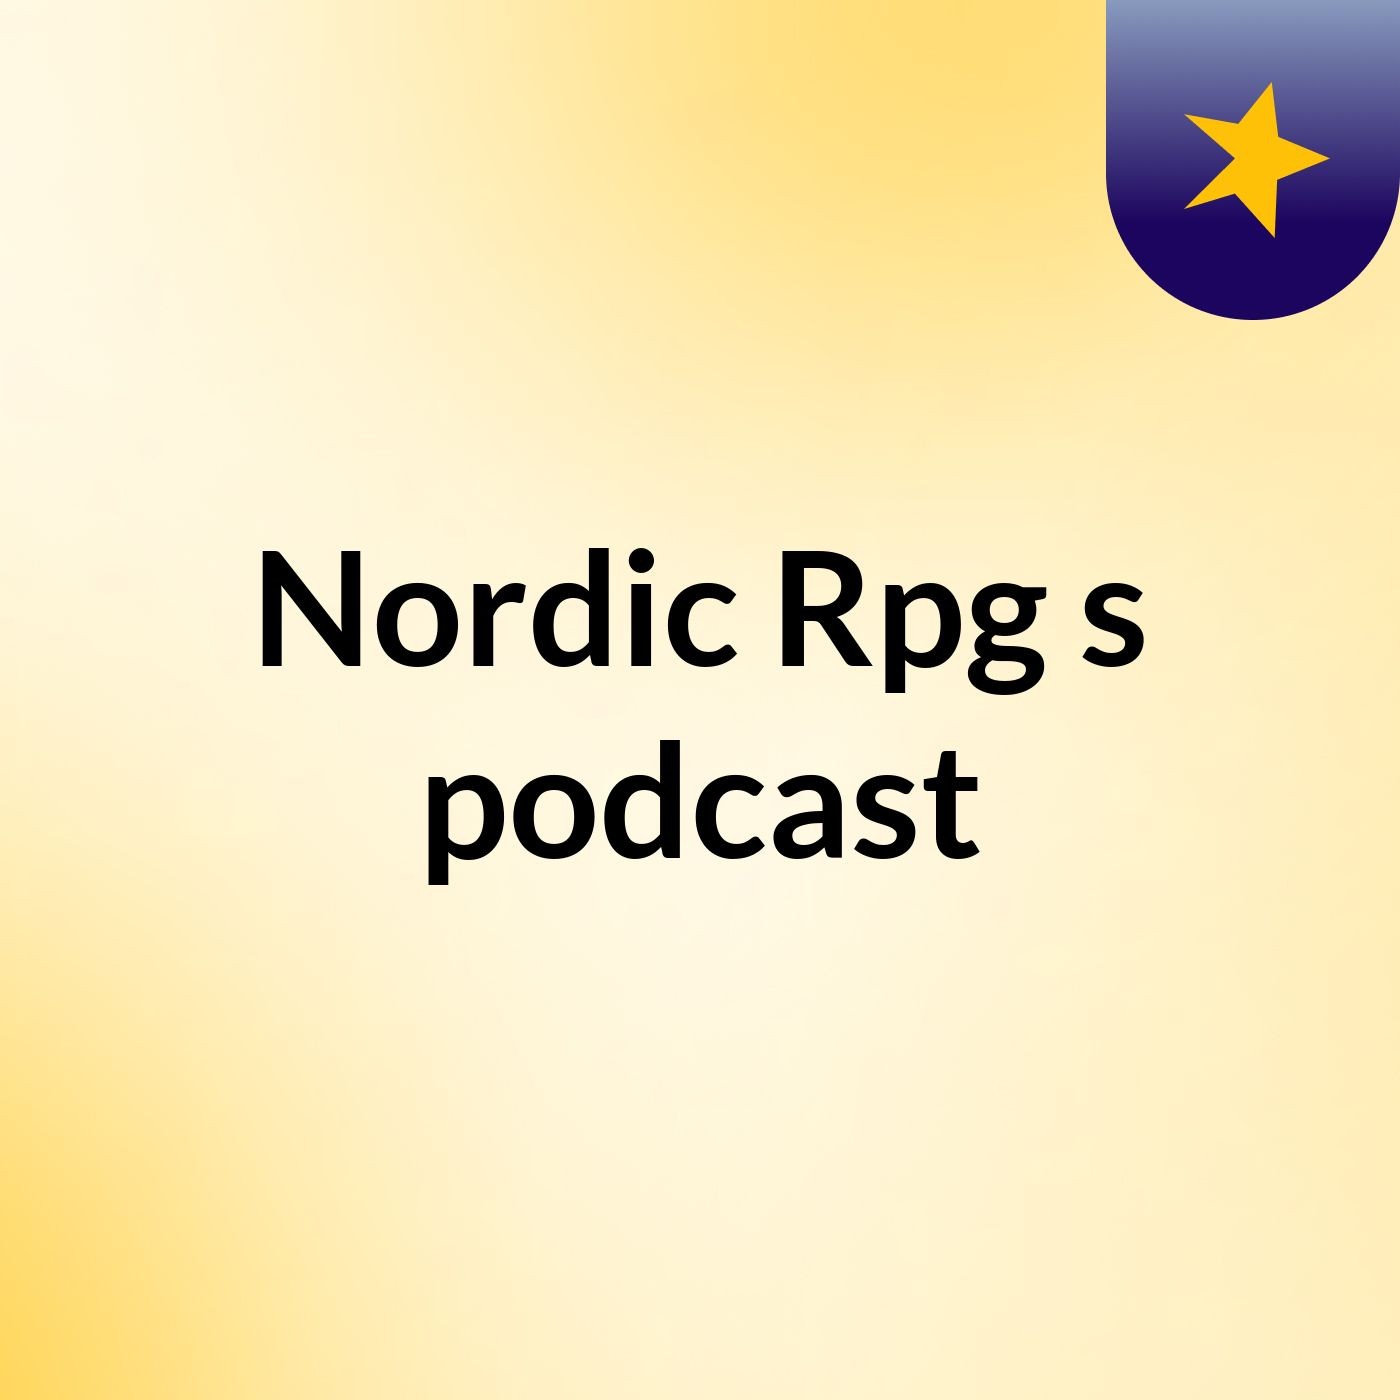 Nordic Rpg's podcast